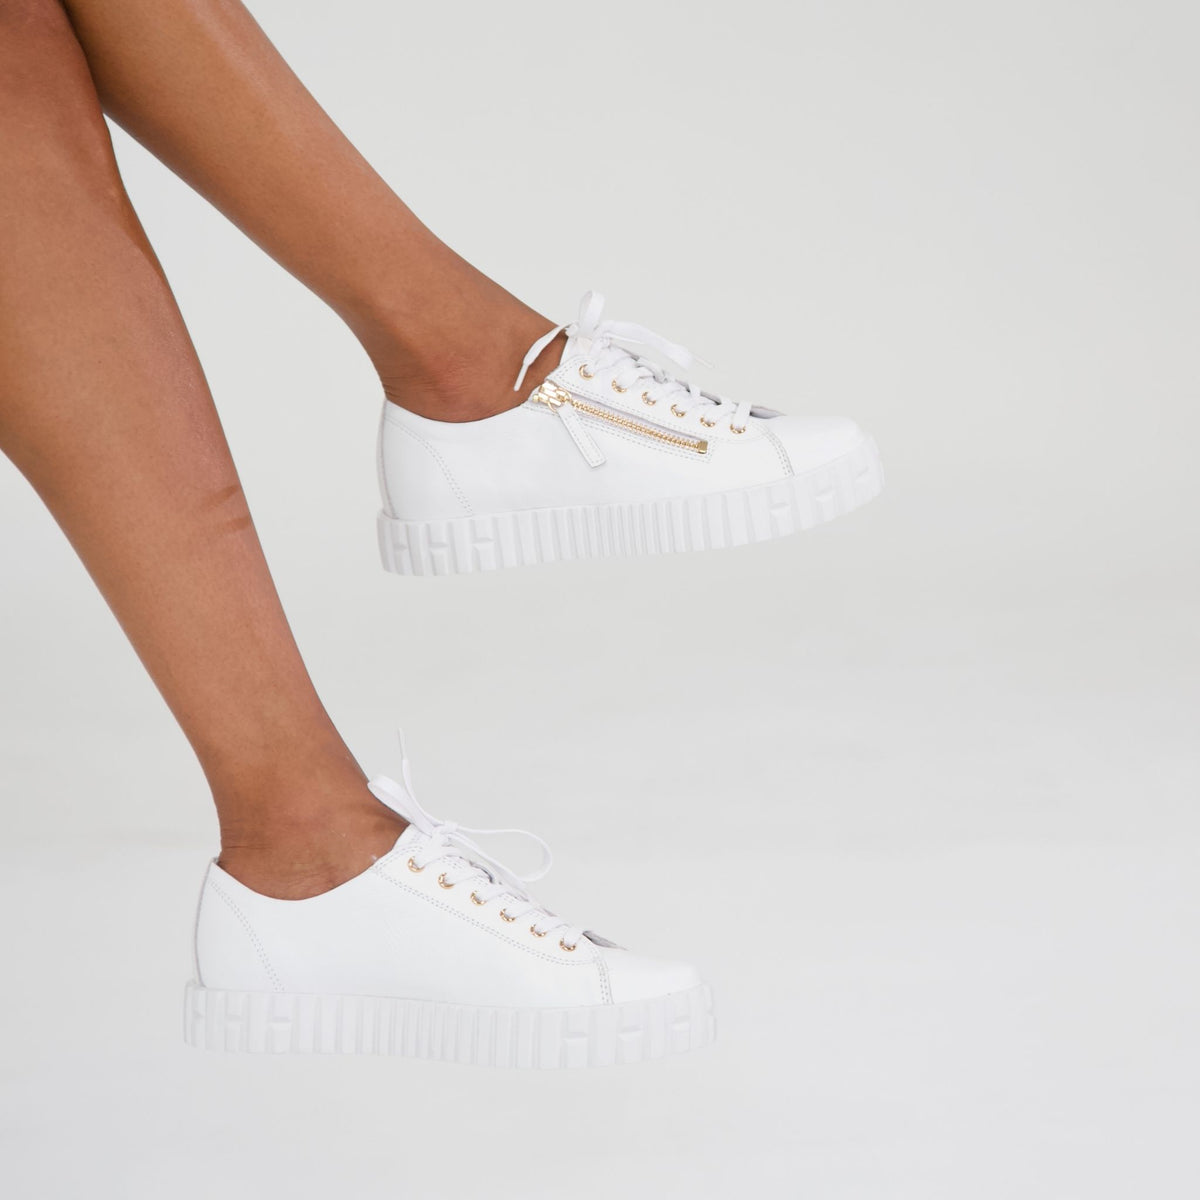 Osloe White Leather Sneakers